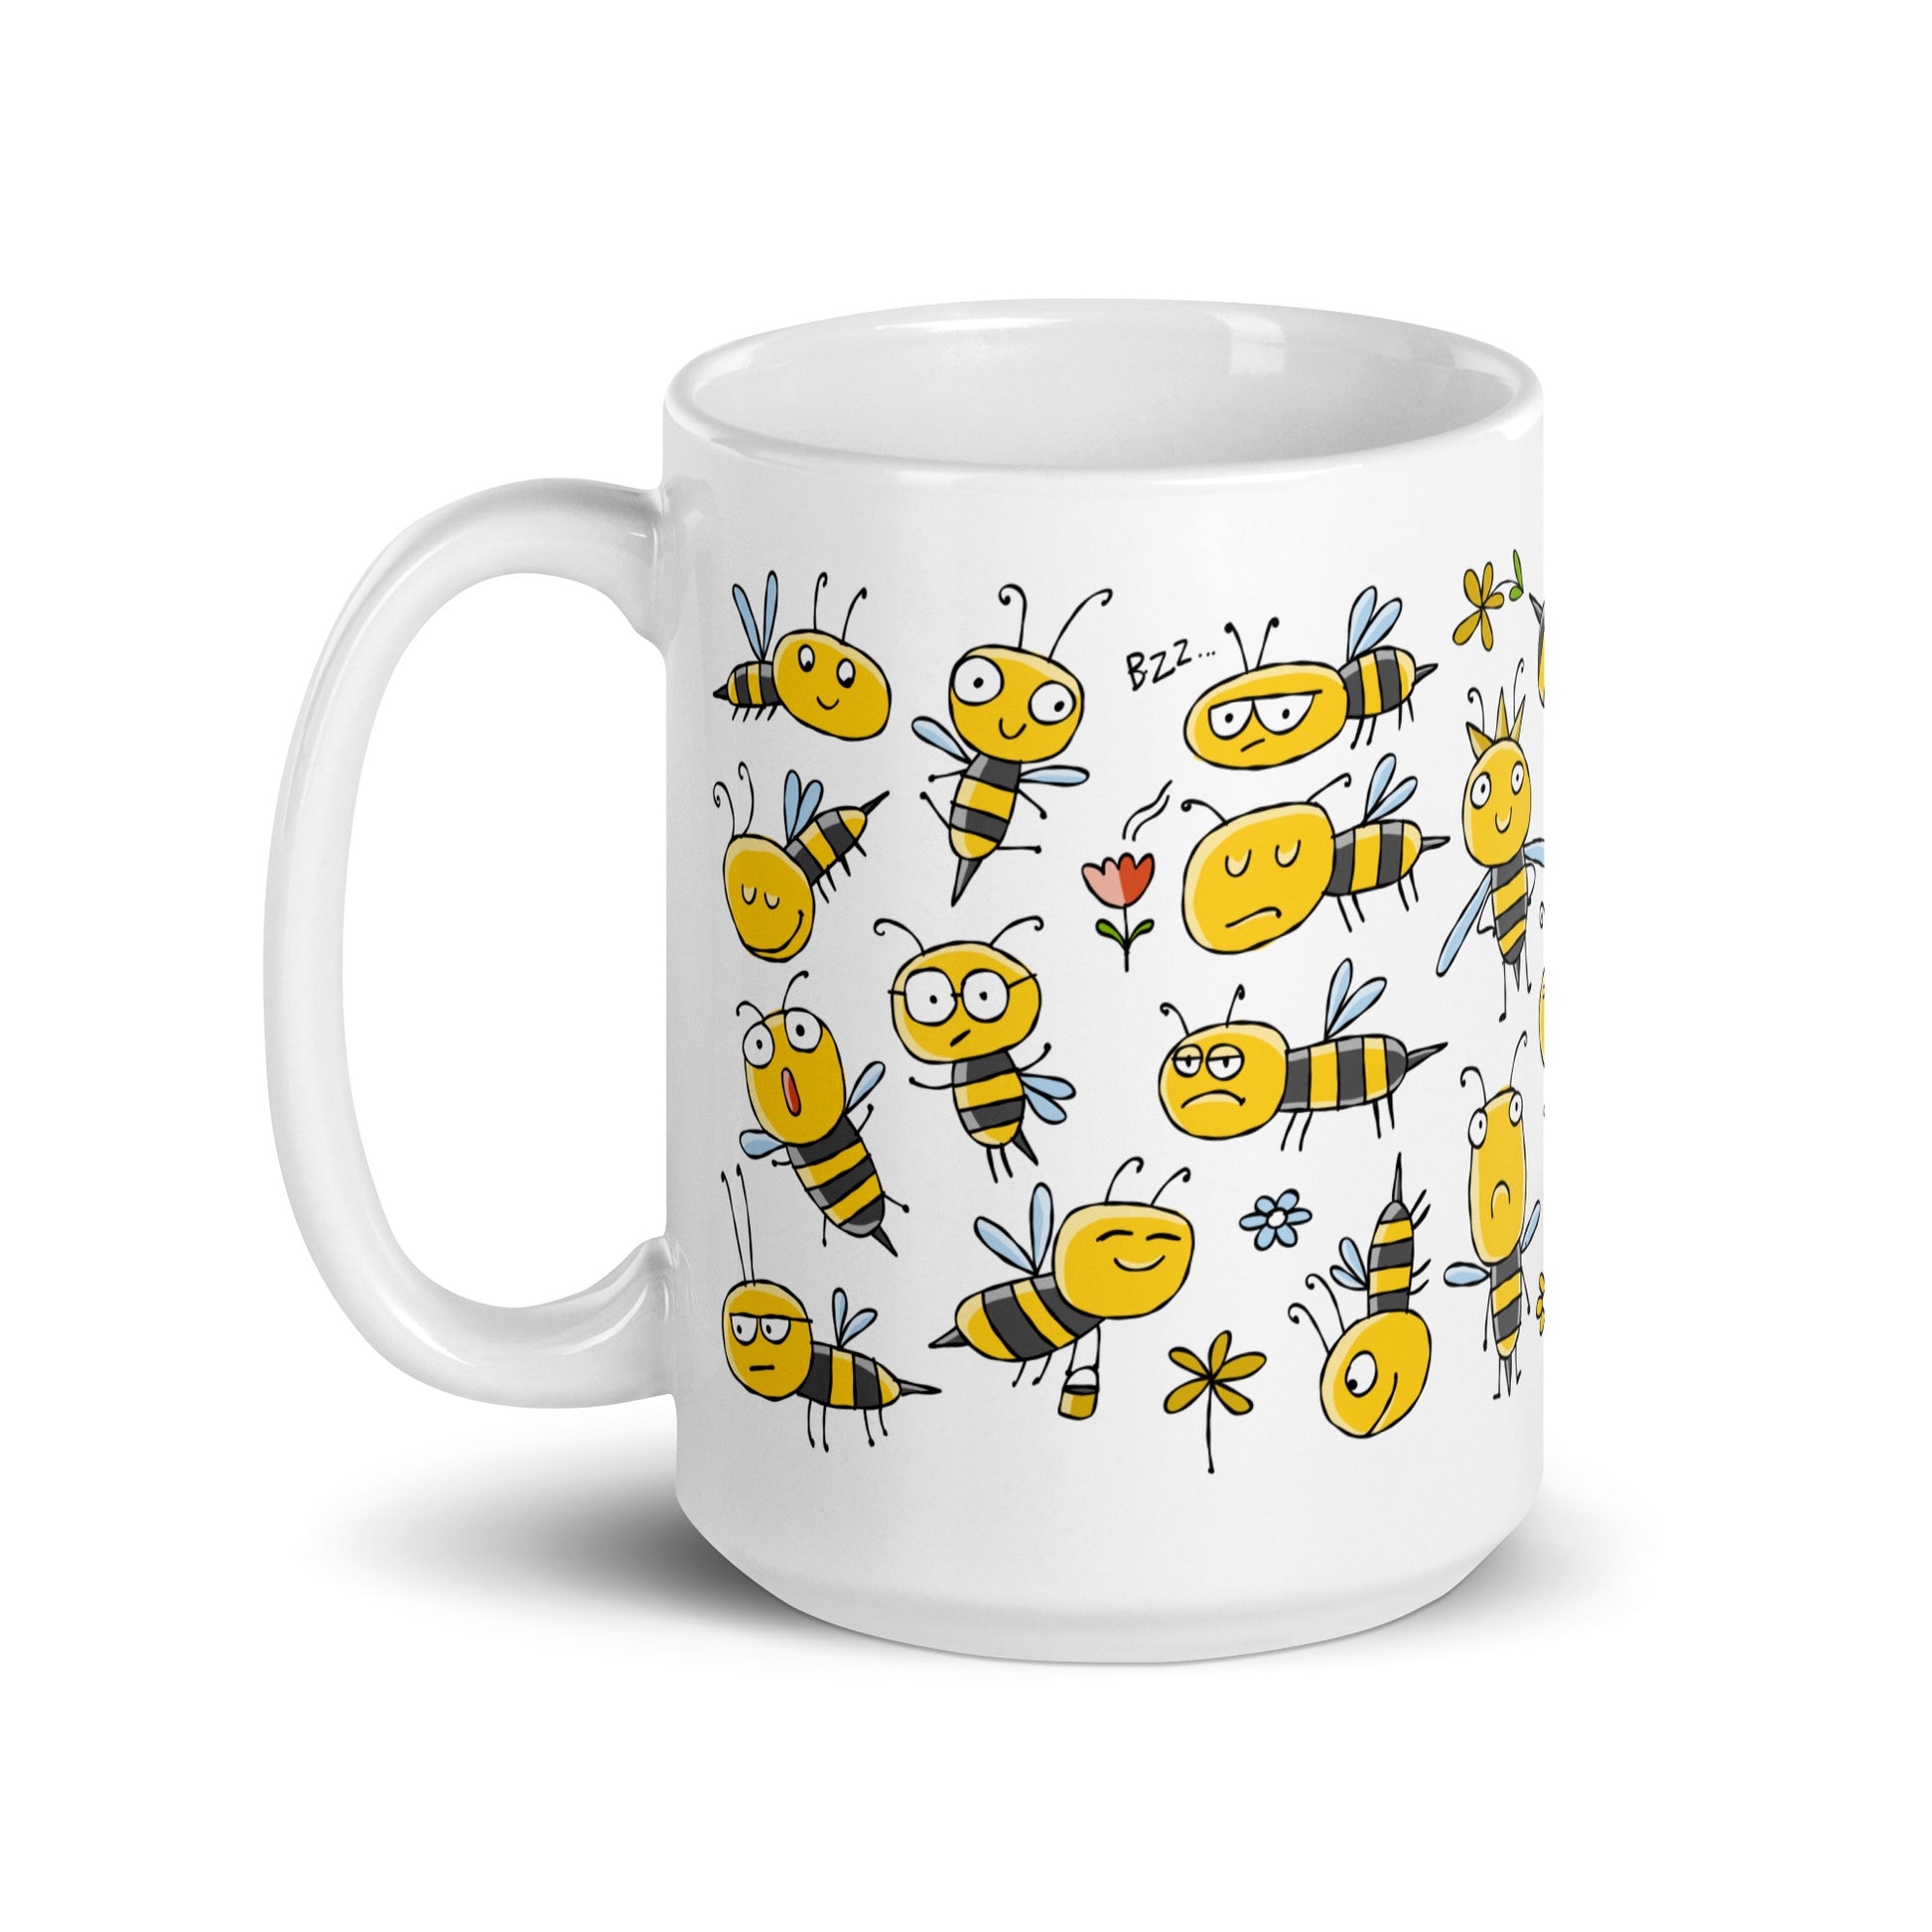 15 oz ceramic mug with Beehive print - funny and cute yellow bees characters.